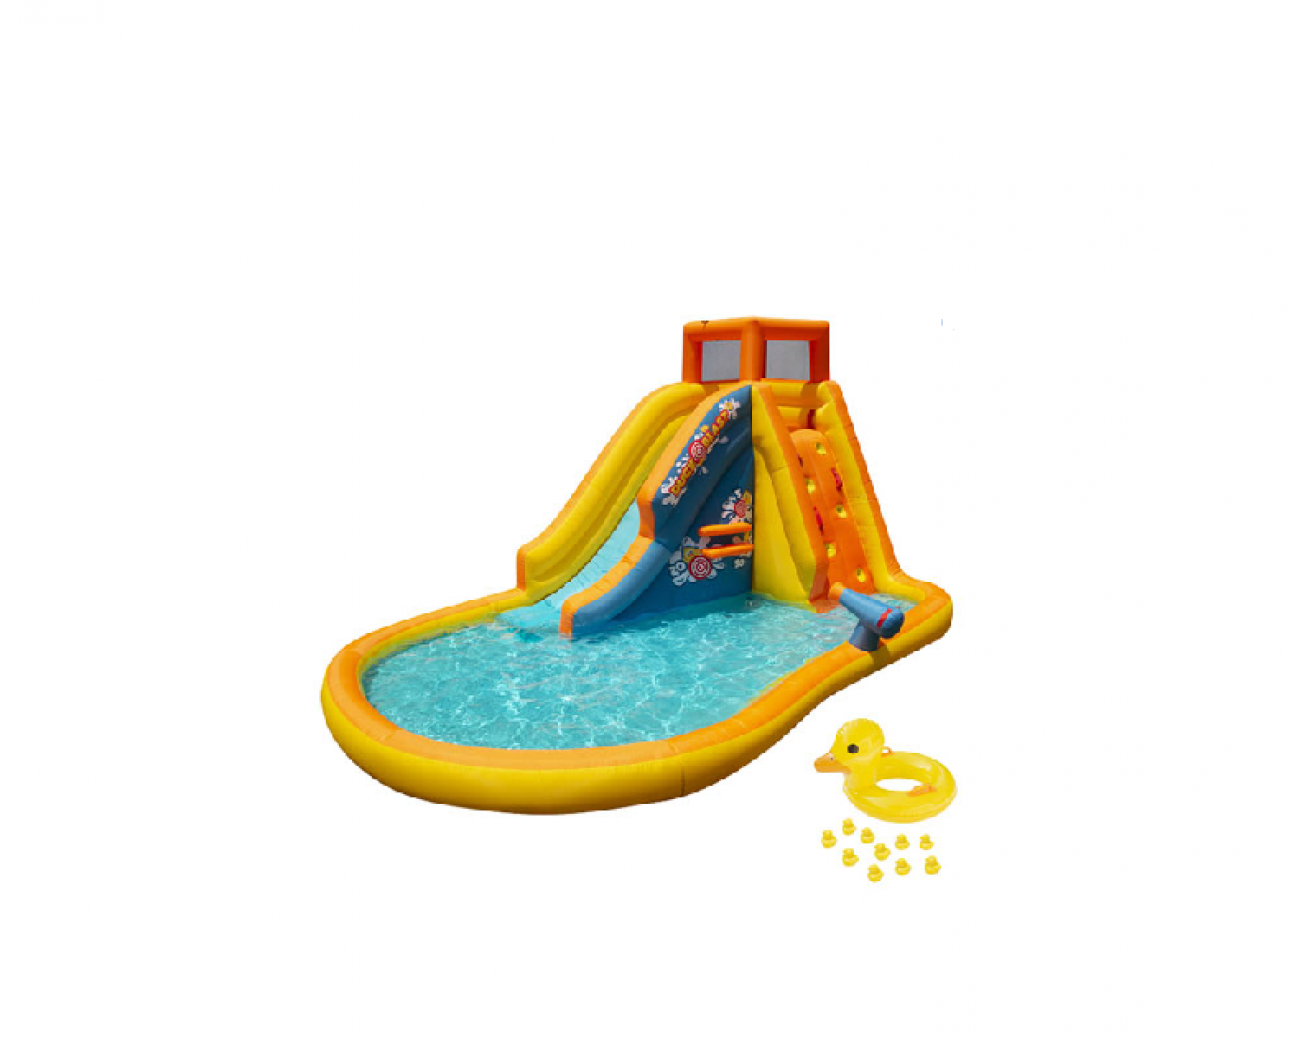 Banzai Giant Inflatable Duck Blast Water Park with Pool & Slide - Multi-Colour